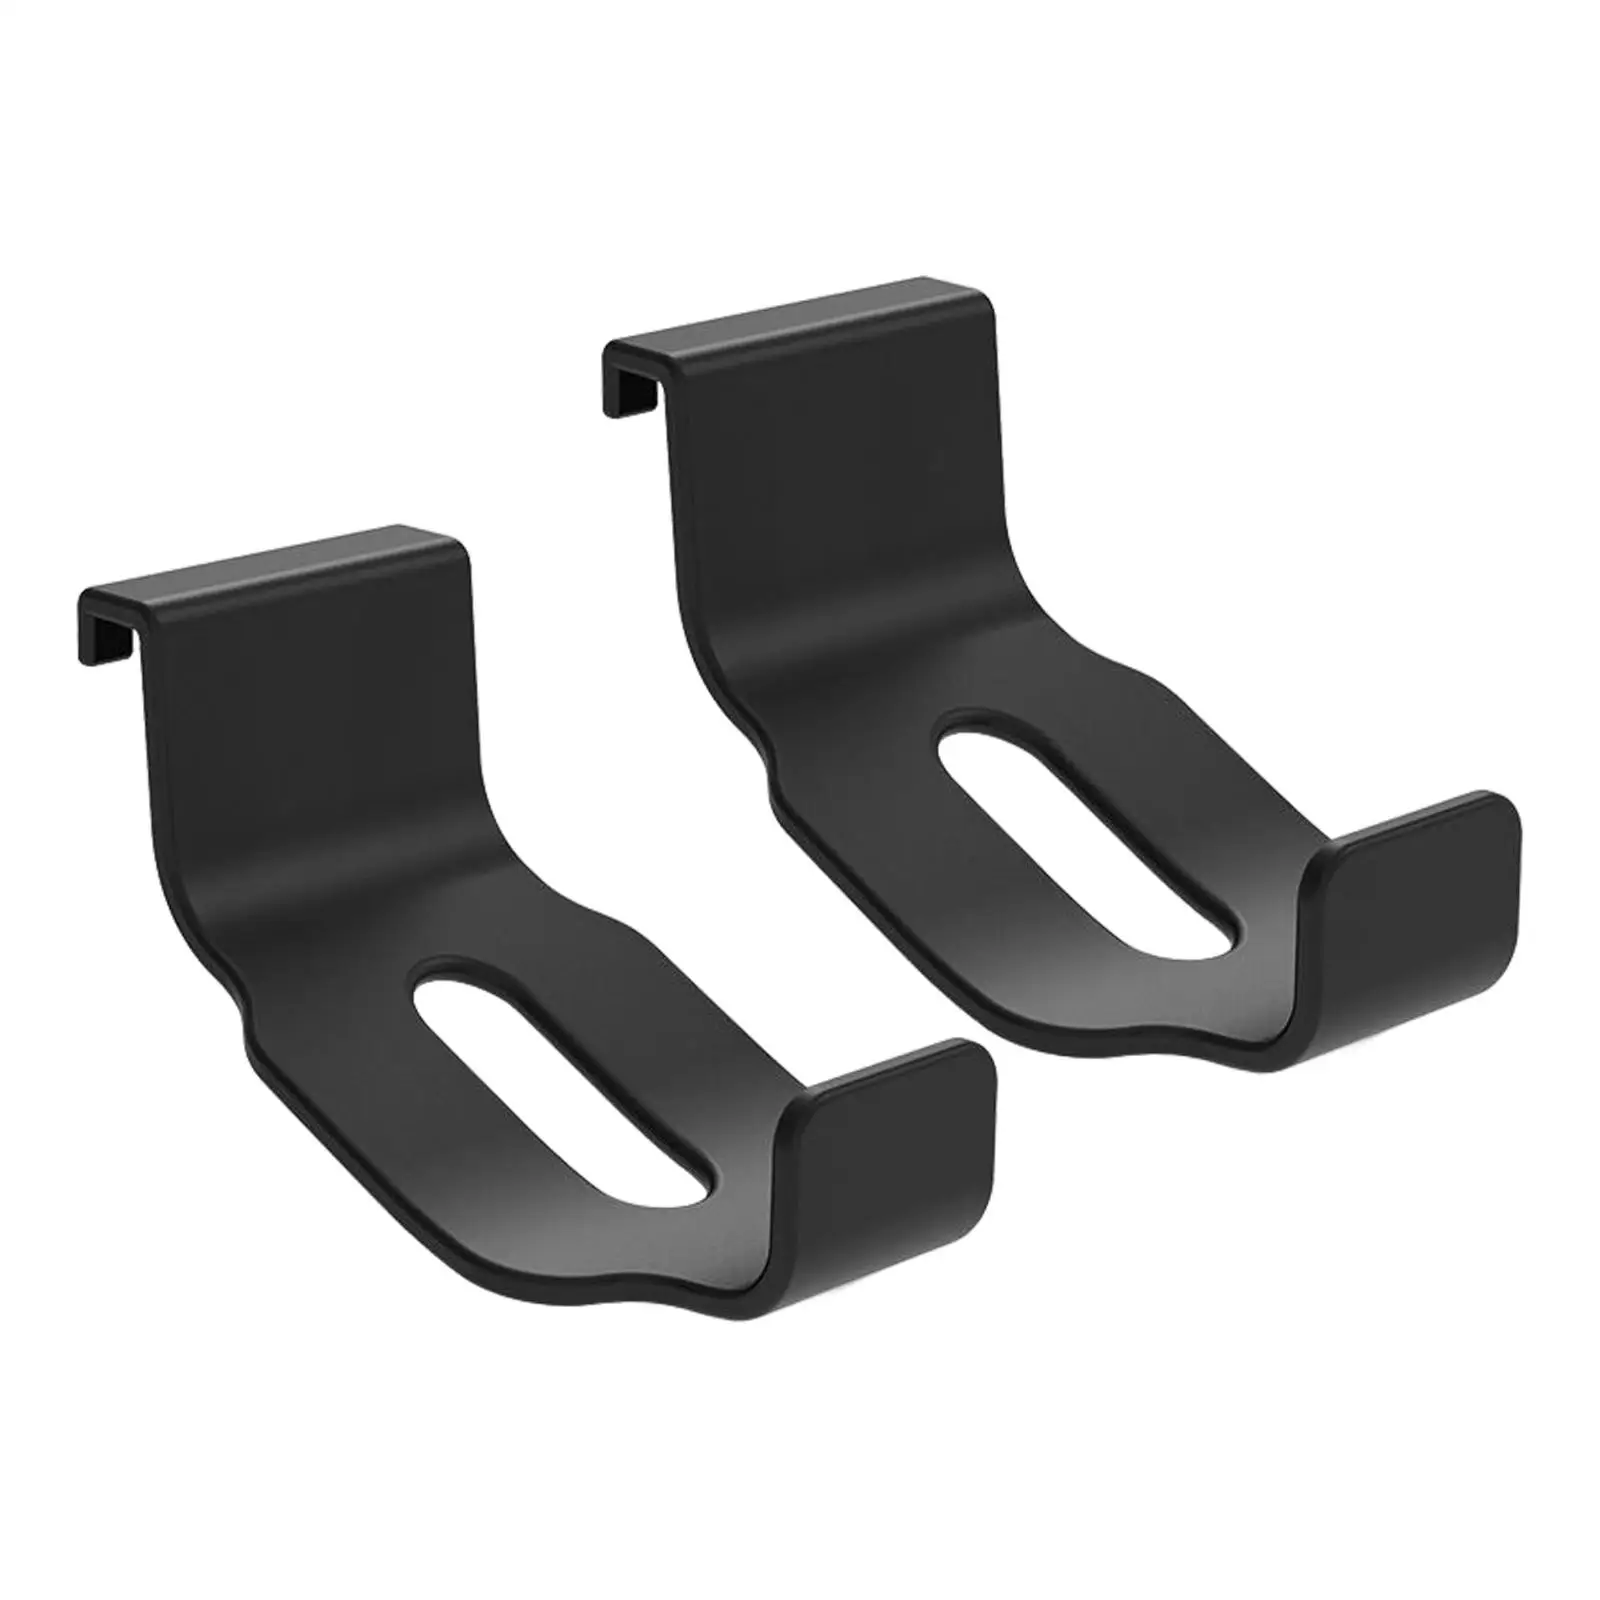 2 Pieces Headset and Controller Stand Controller Accessories for